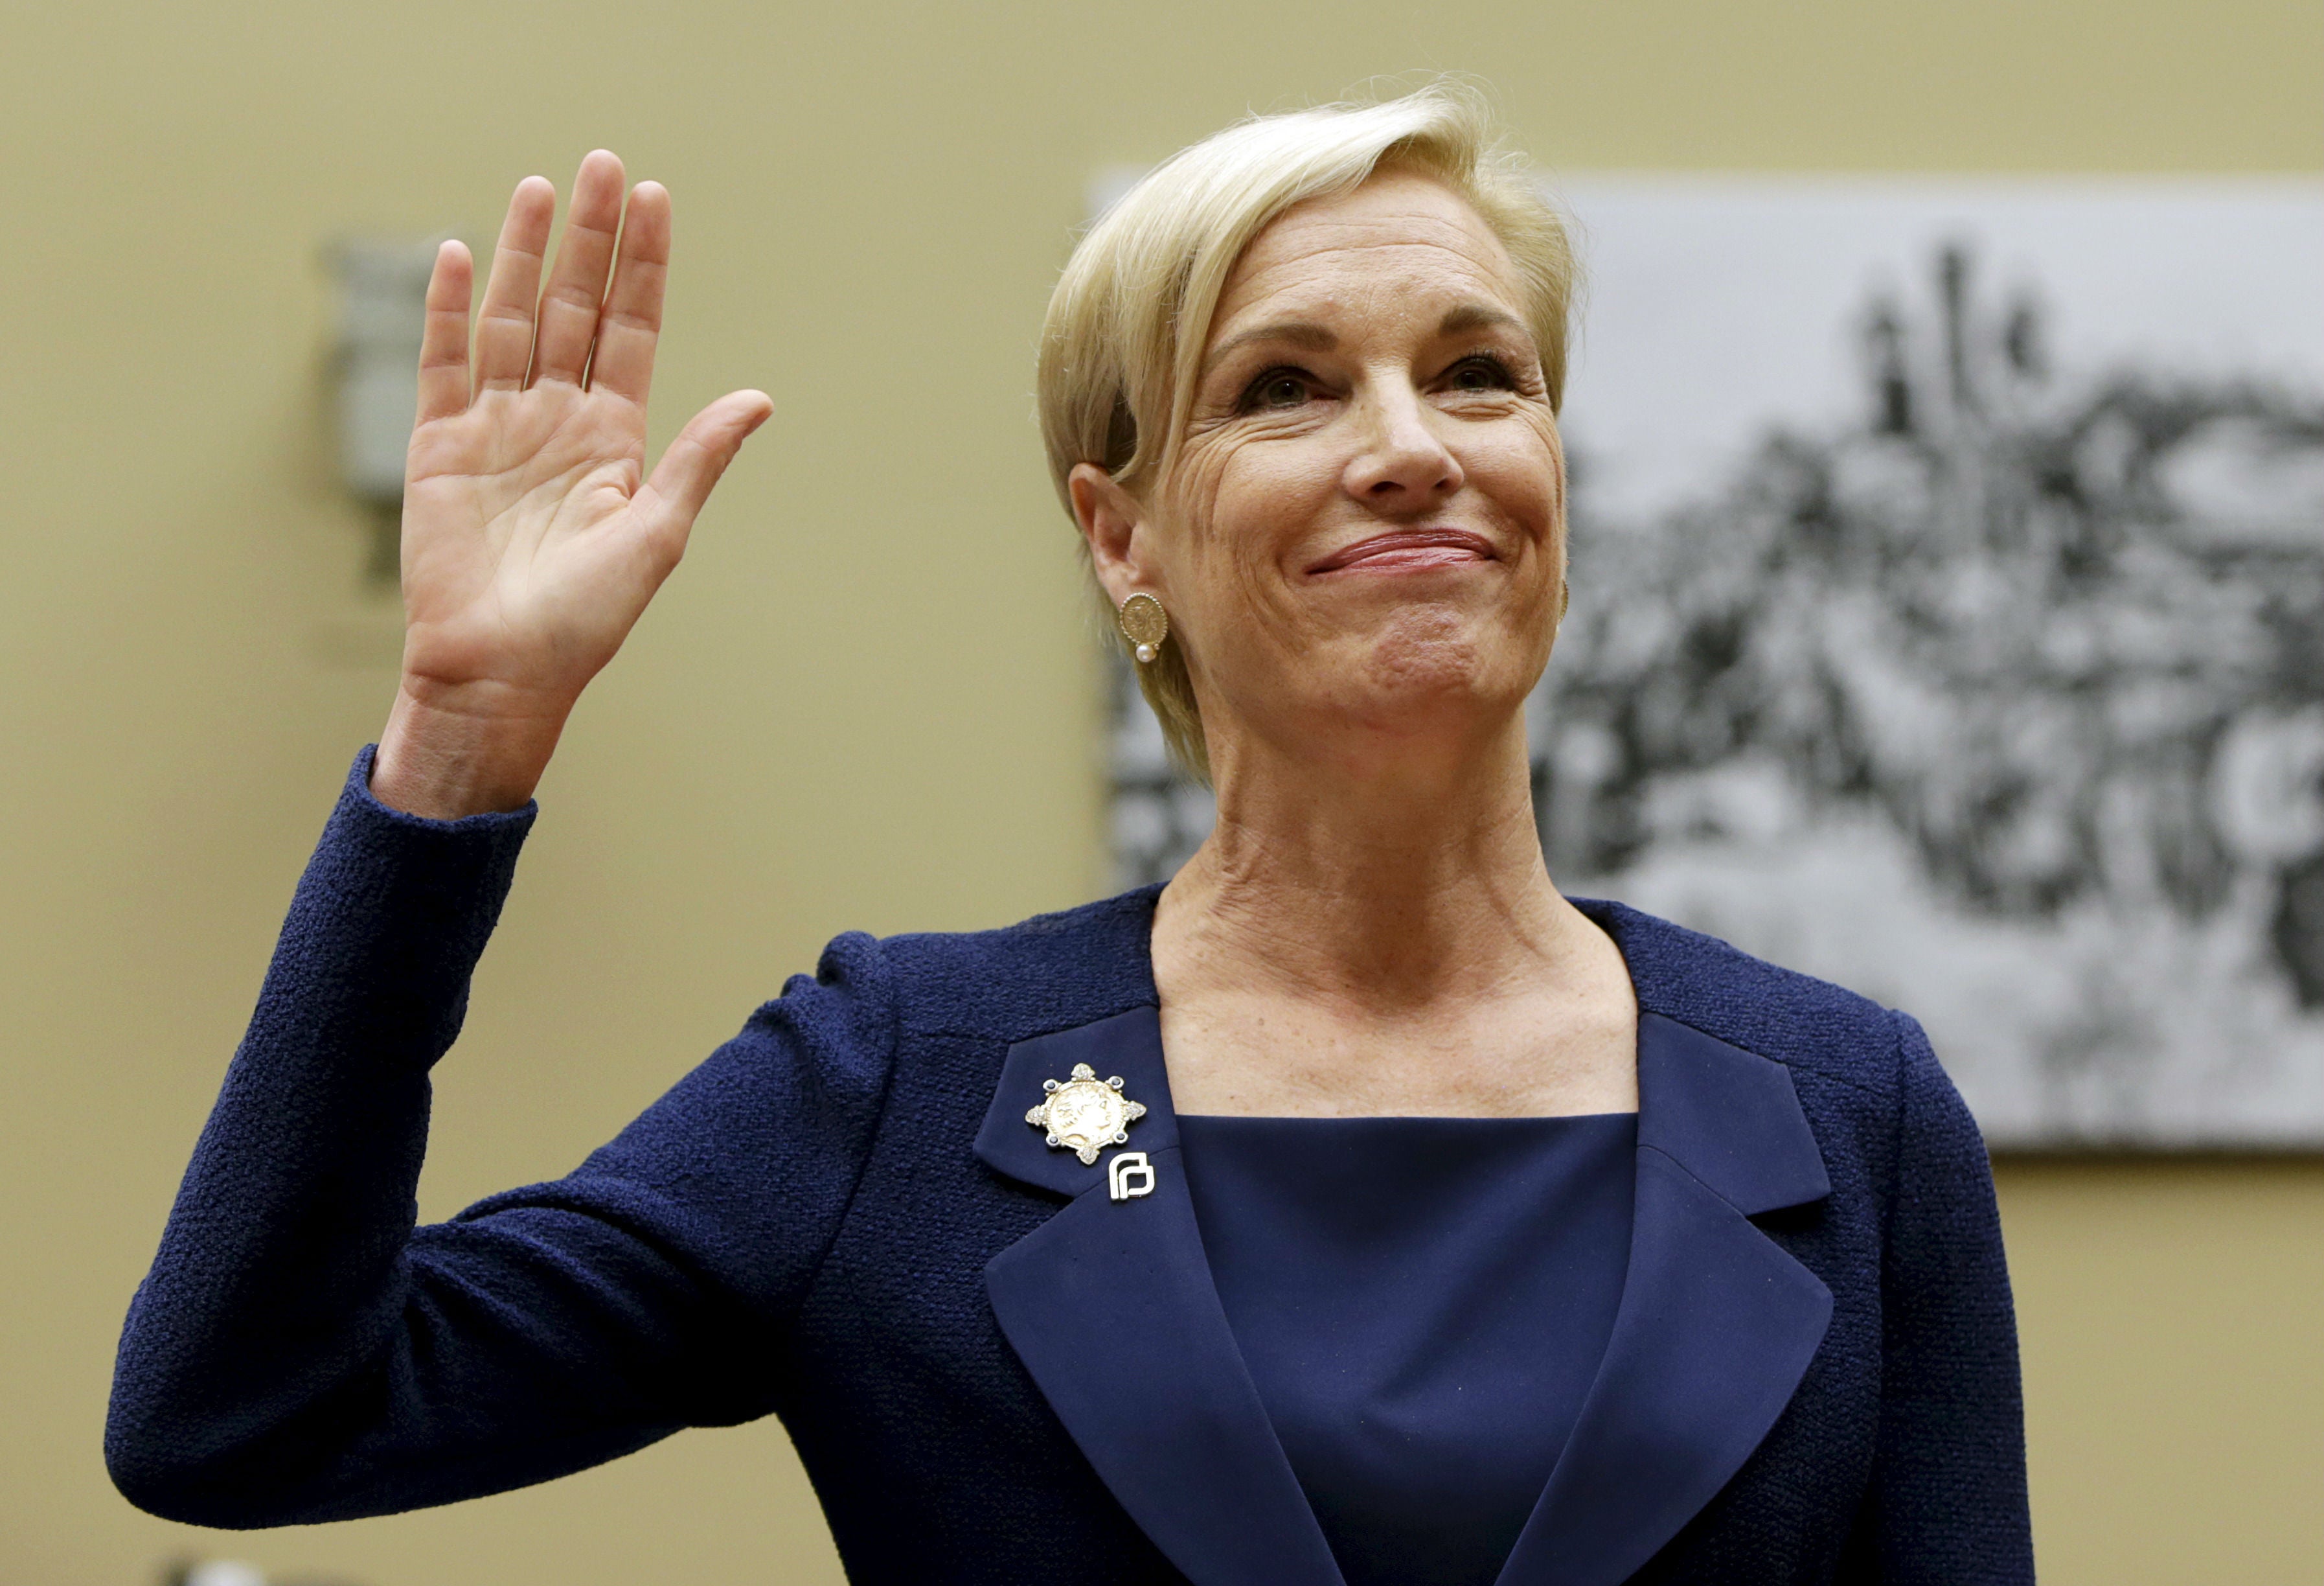 Cecile Richards takes the oath on Capitol Hill on Tuesday